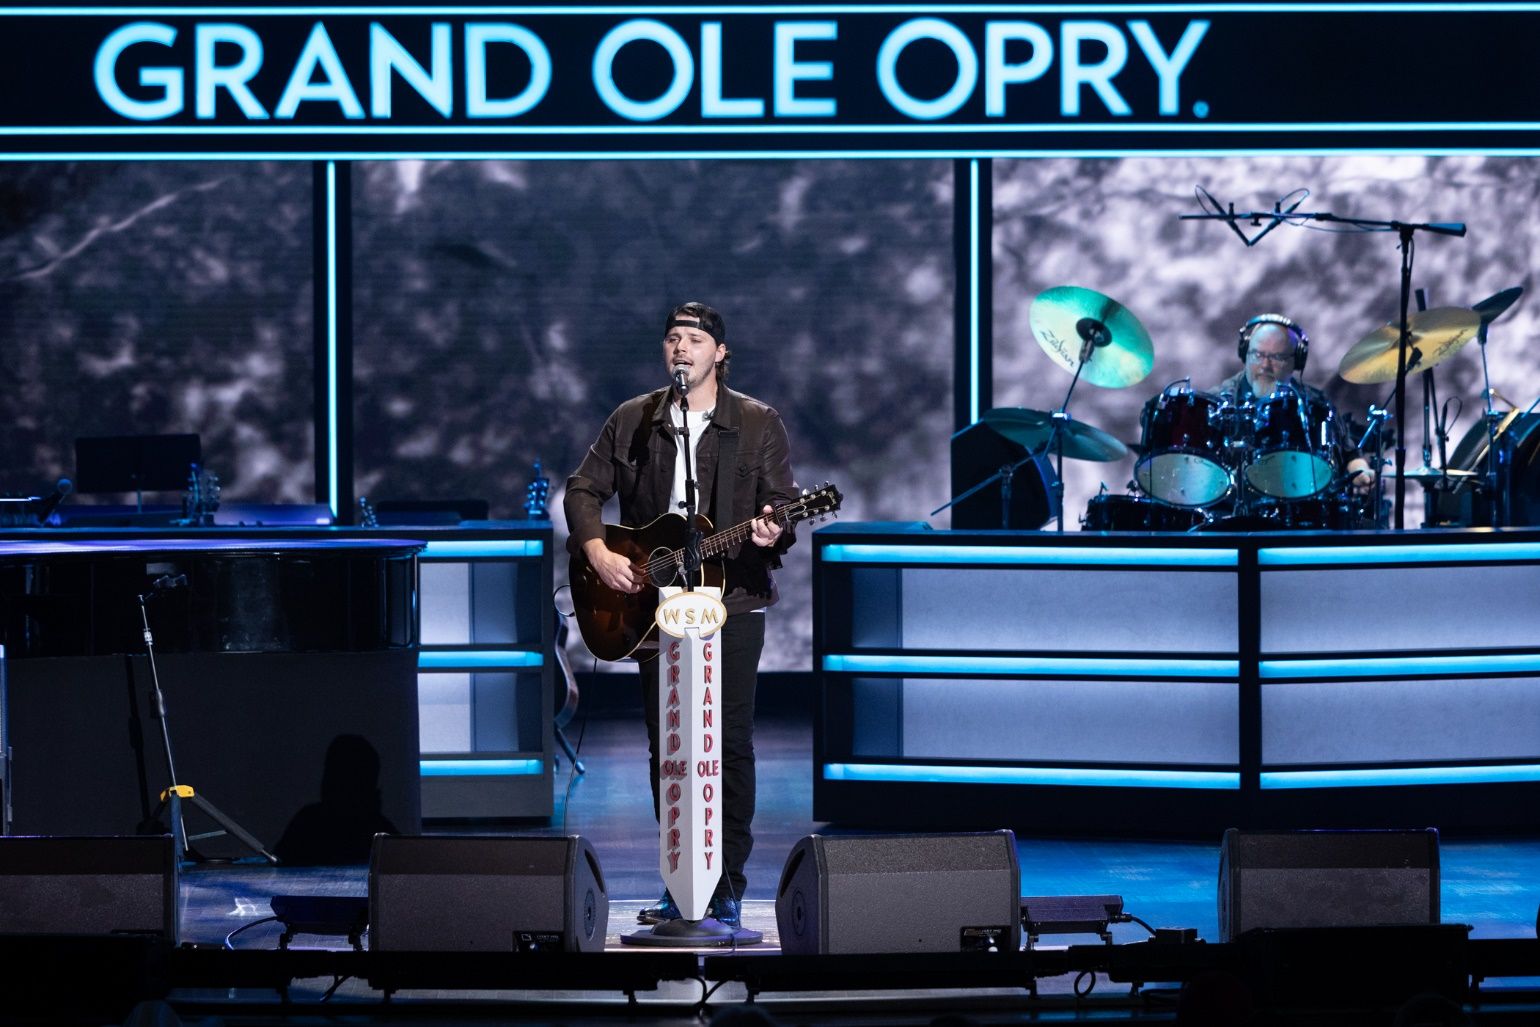 PHOTOS: Josh Ross Makes Grand Ole Opry Debut